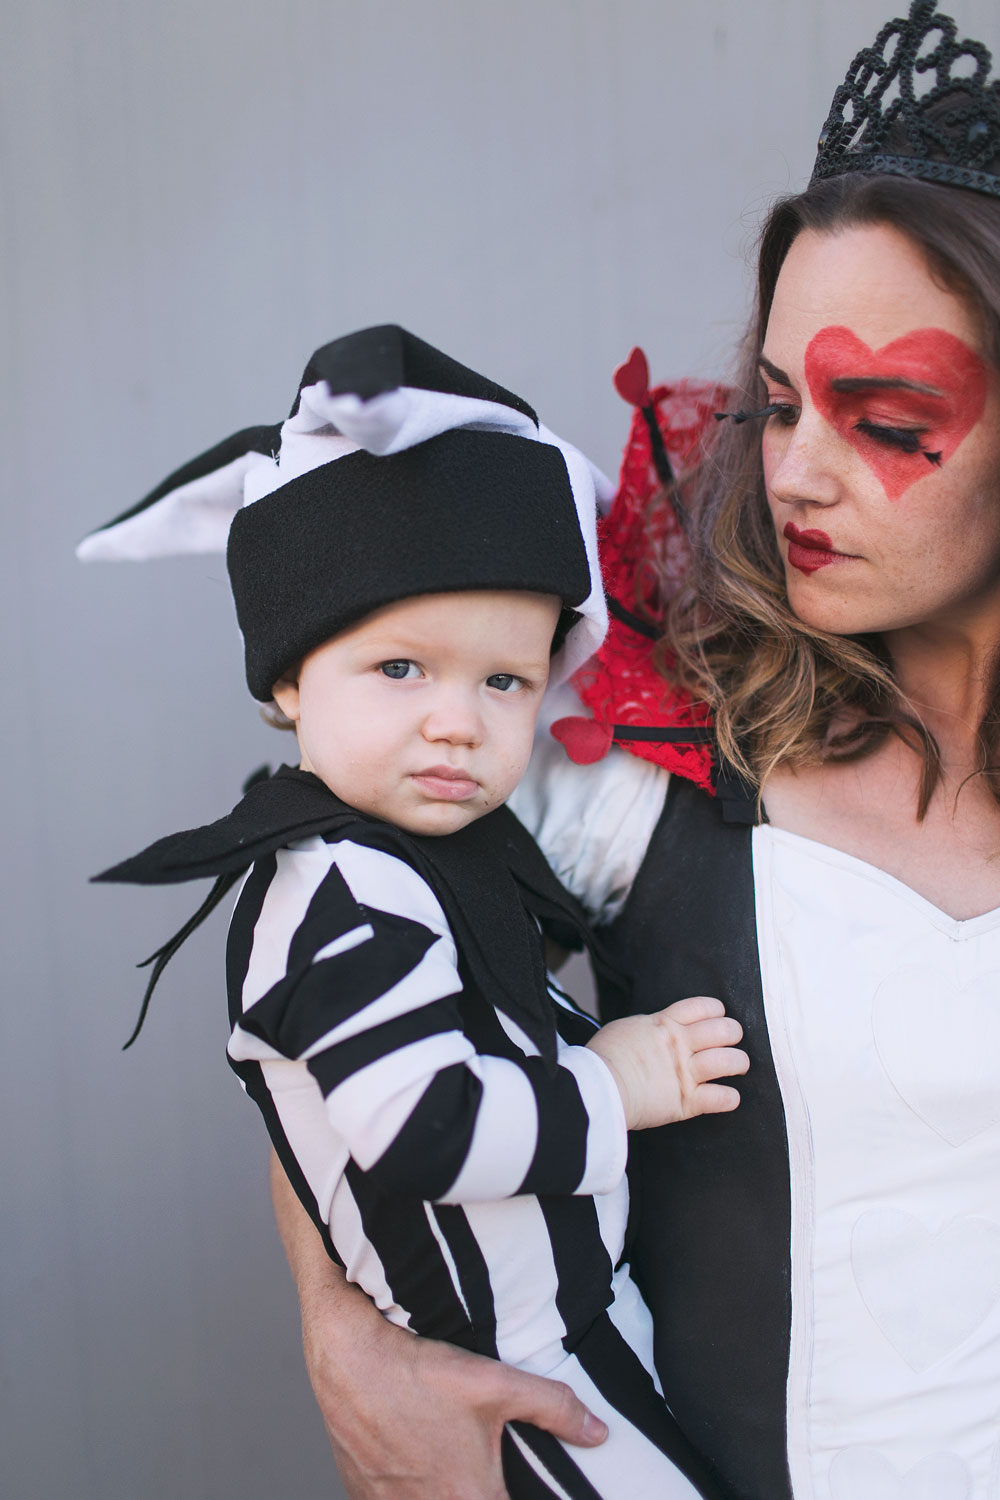 This Queen of Hearts family costume idea is sure to be a hit this Halloween. Learn how to create your own! #halloweencostumes #familyhalloweencostumes #queenofhearts #familycostumeideas